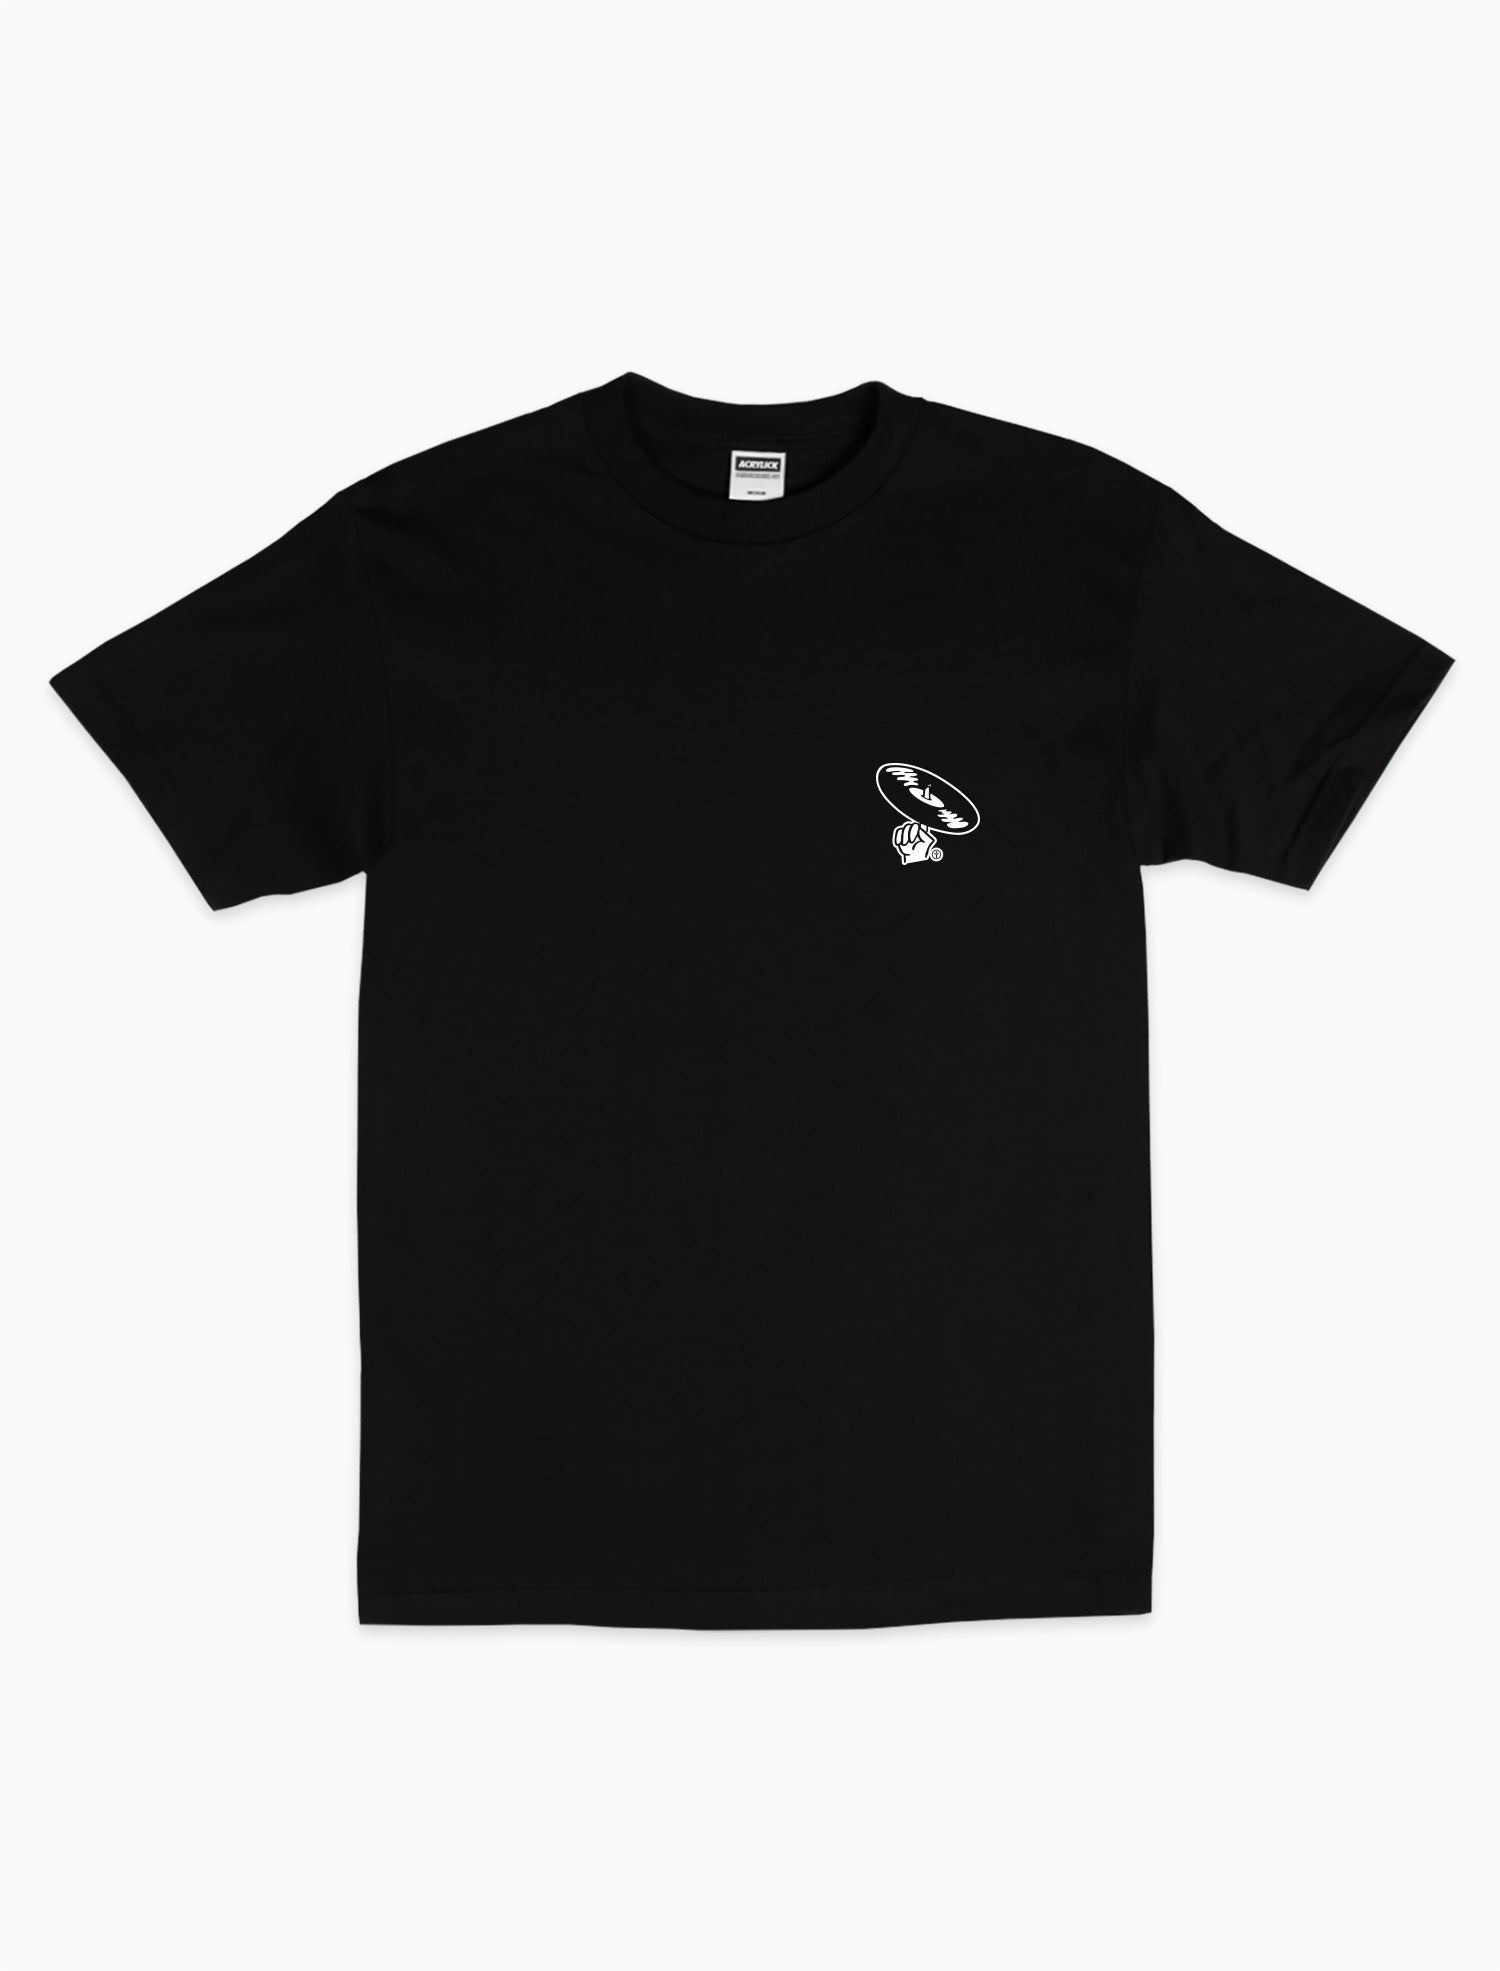 Acrylick Goods - One Nation Tee Available in Black and Charcoal Heather